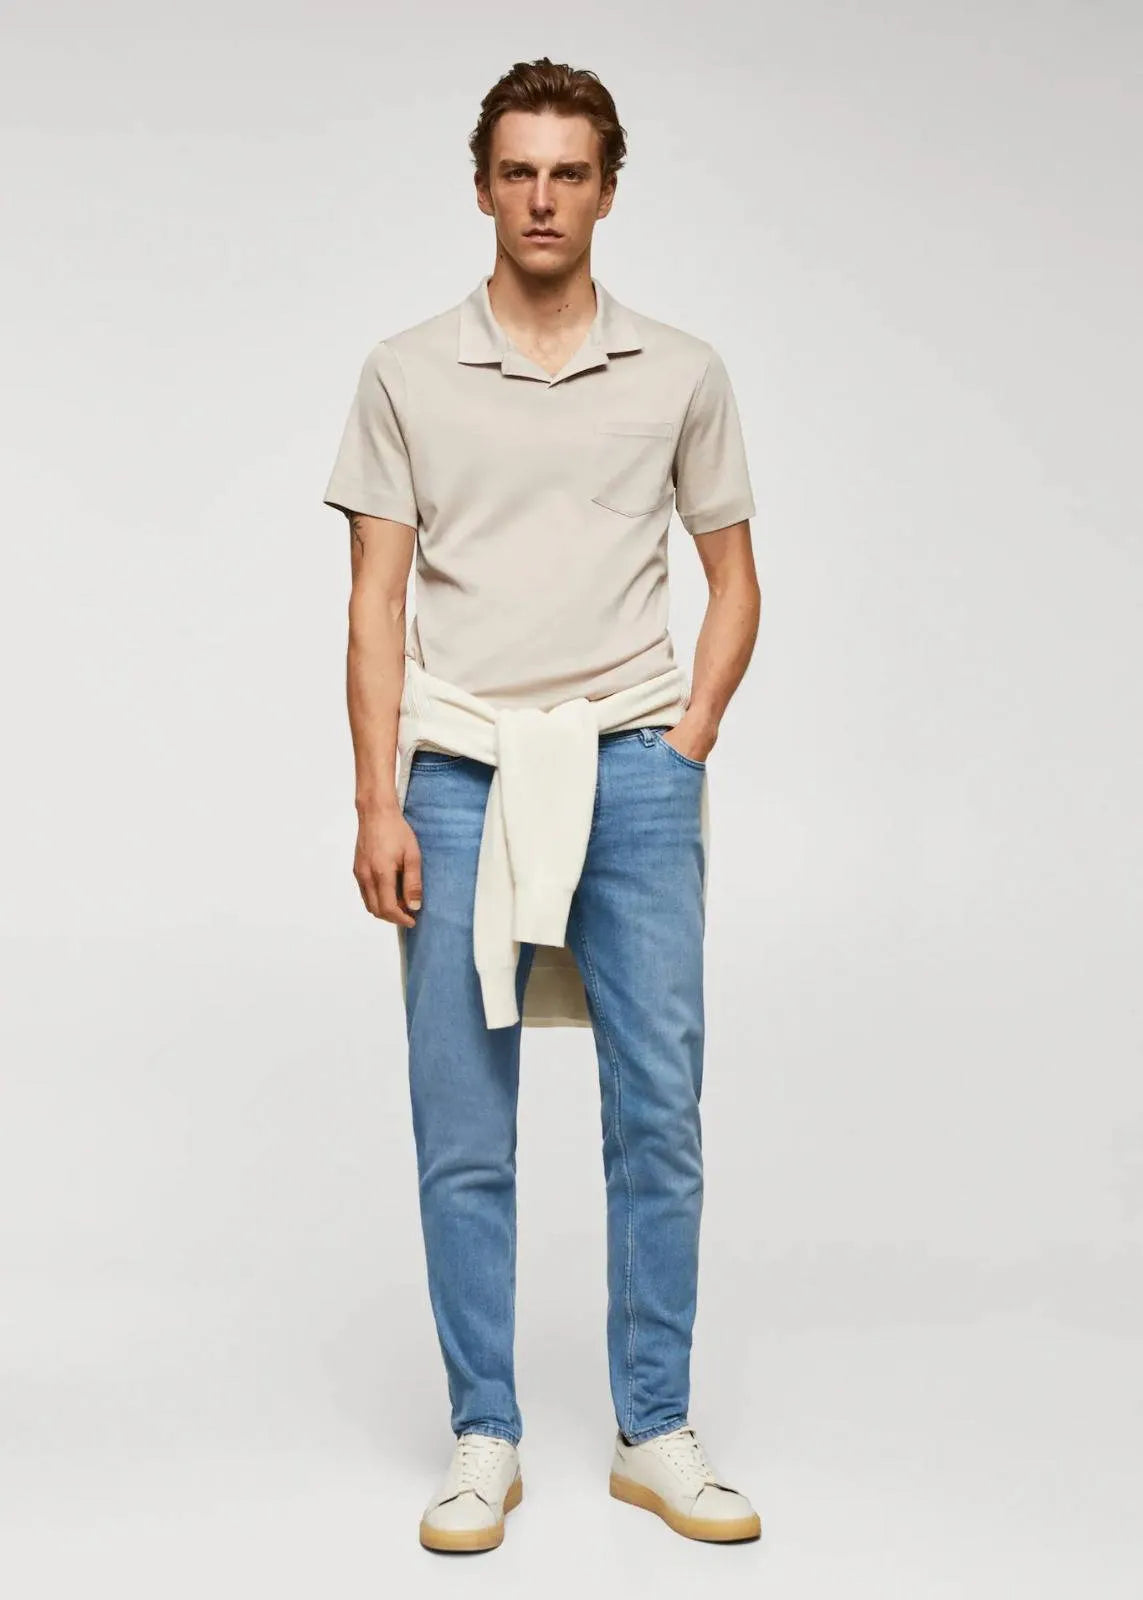 Mango Man Jeans: Light blue & breezy, slim fit for a modern look (mention size if relevant).Designed to accentuate your figure without sacrificing comfort. light wash, slim fit, light blue, summer, comfortable.